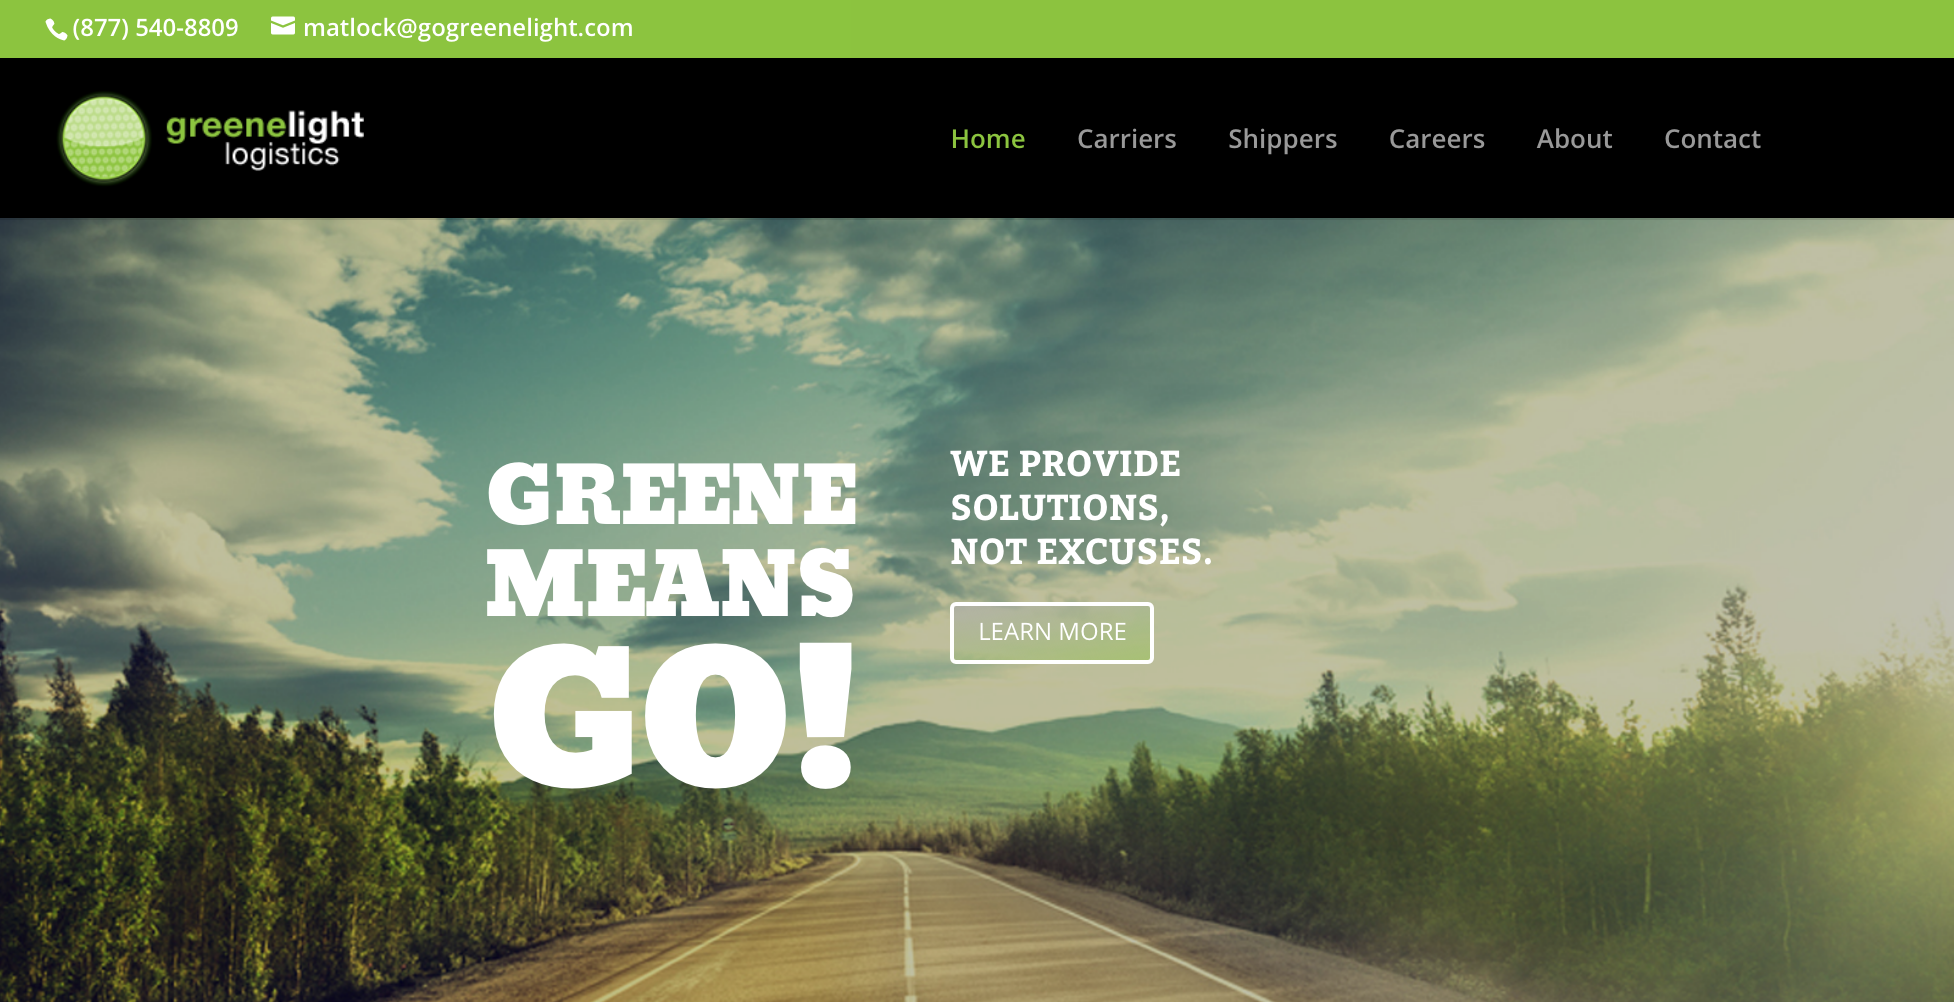 The homepage of the Greenelight Logistics website, published to: "Web Design, WordPress, Graphic Design, and Writing for Greenelight Logistics"